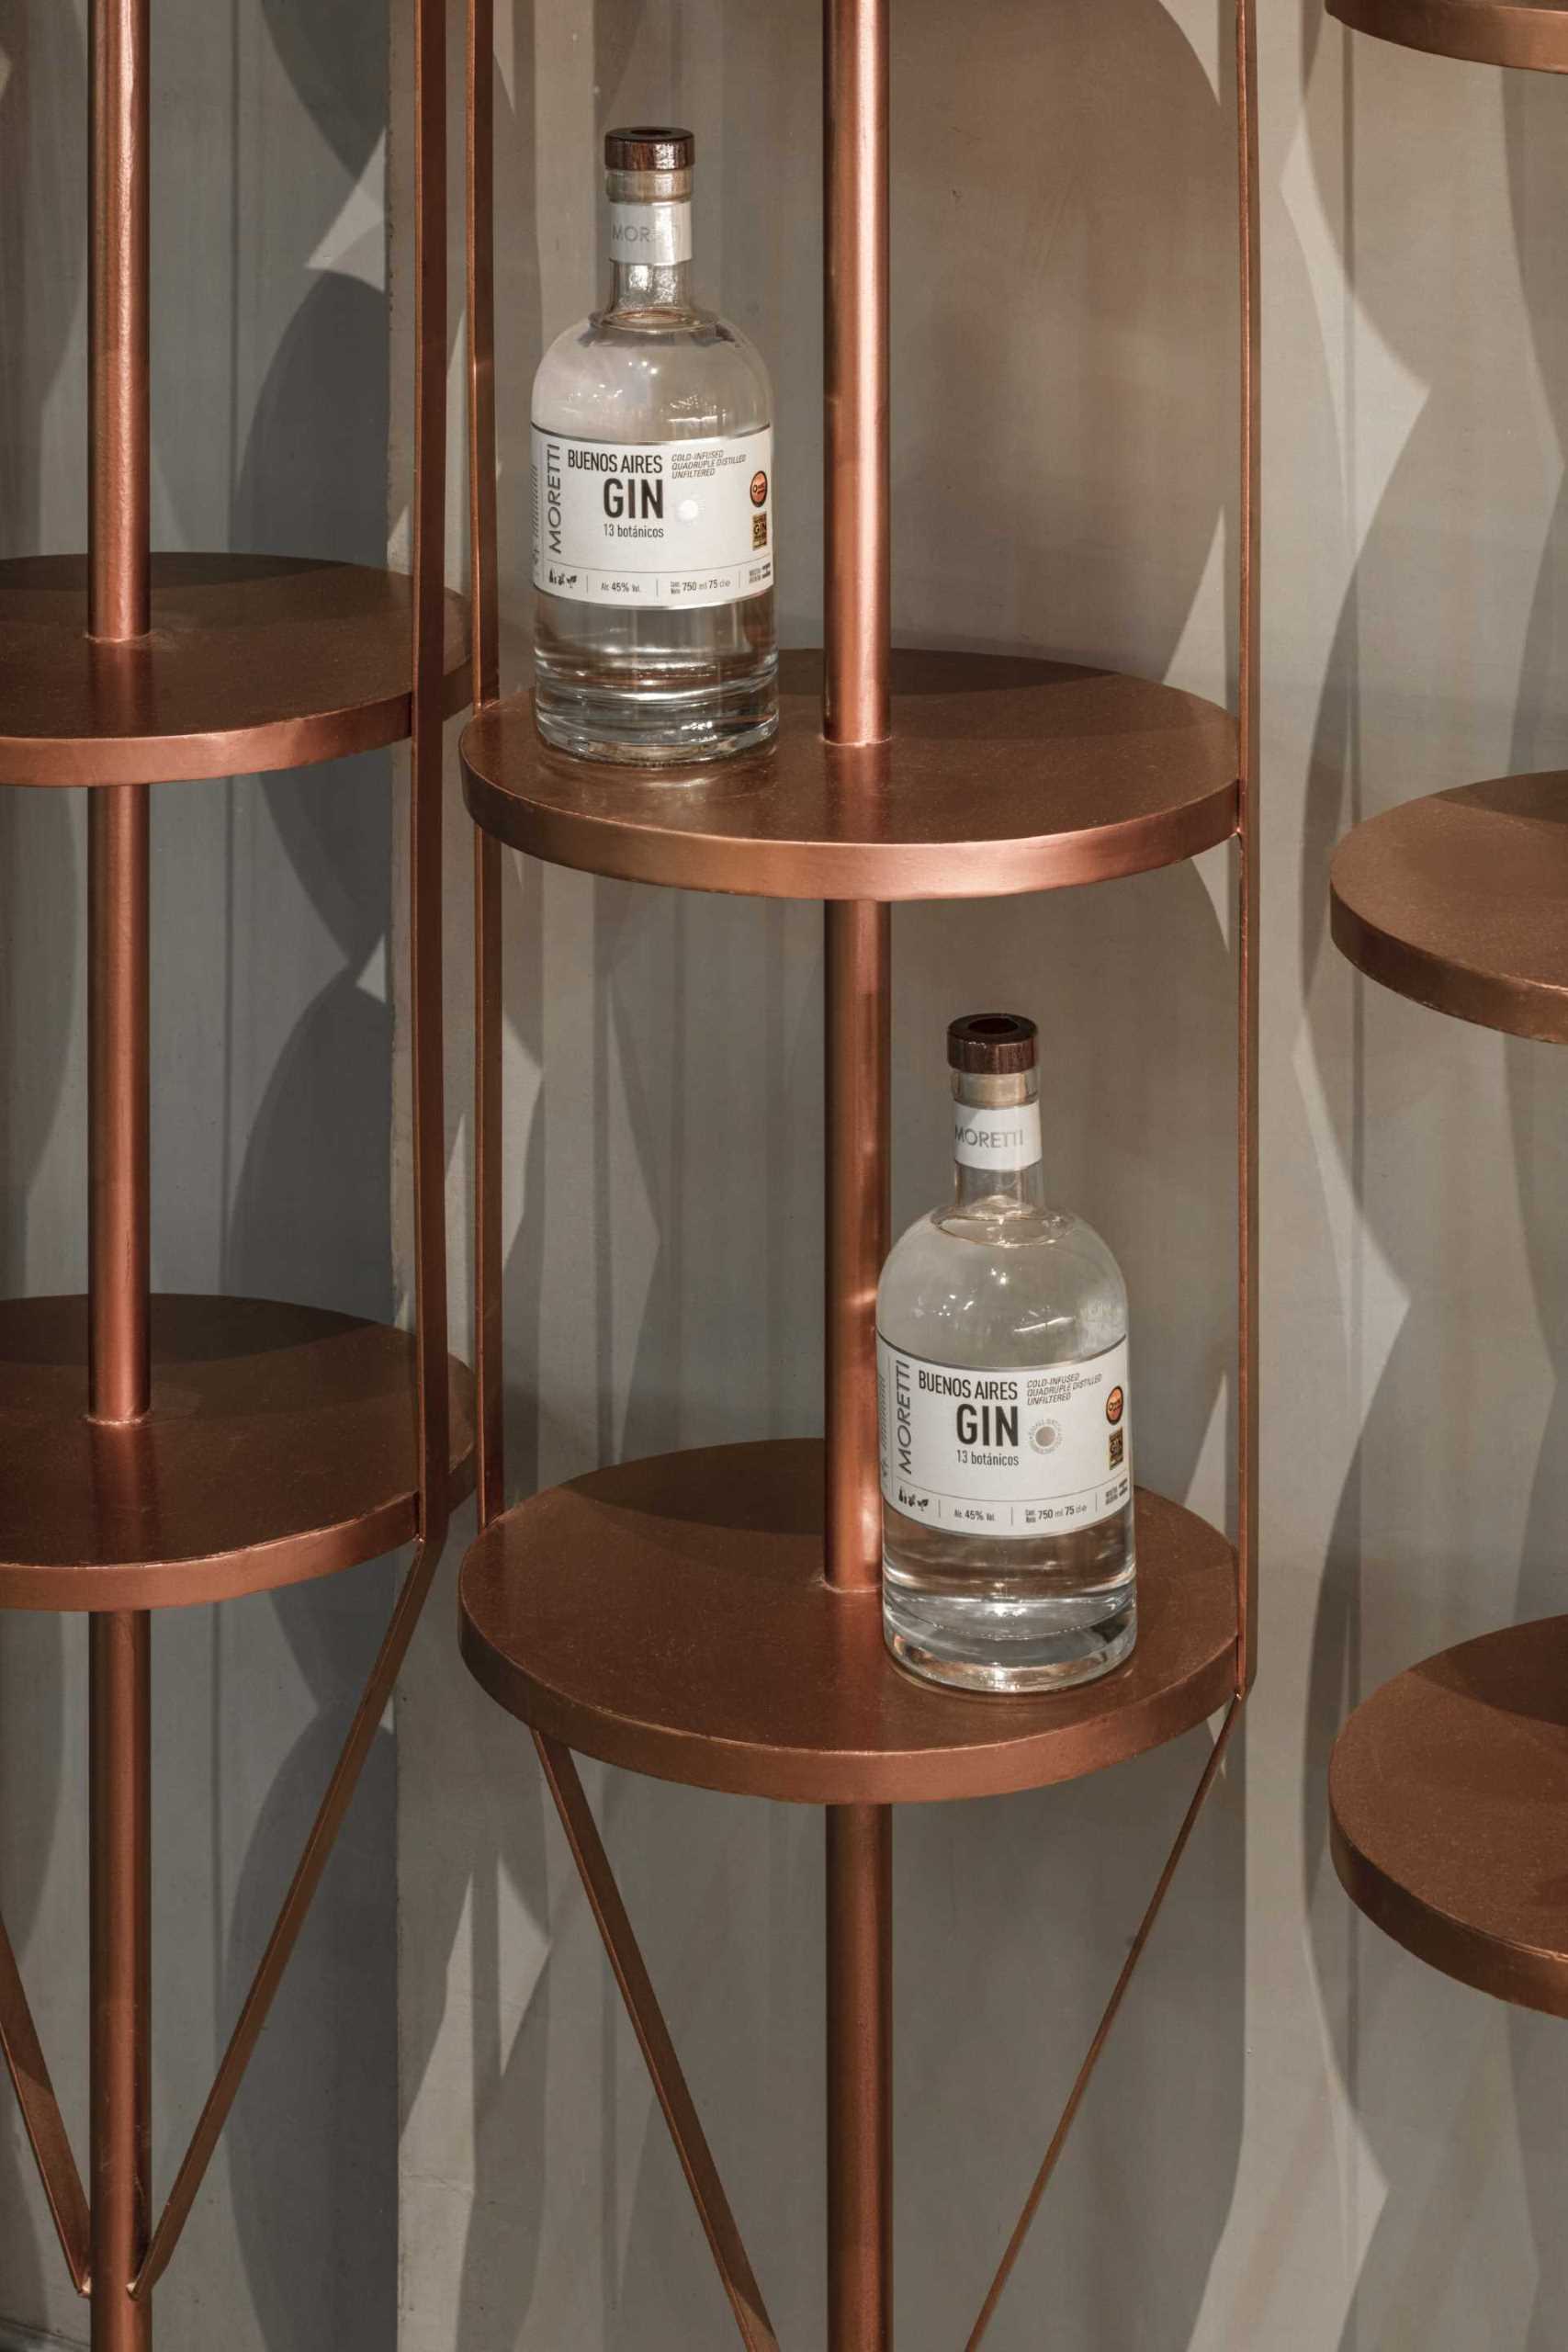 A modern gin bar has an interior inspired by materials found in the distillery.